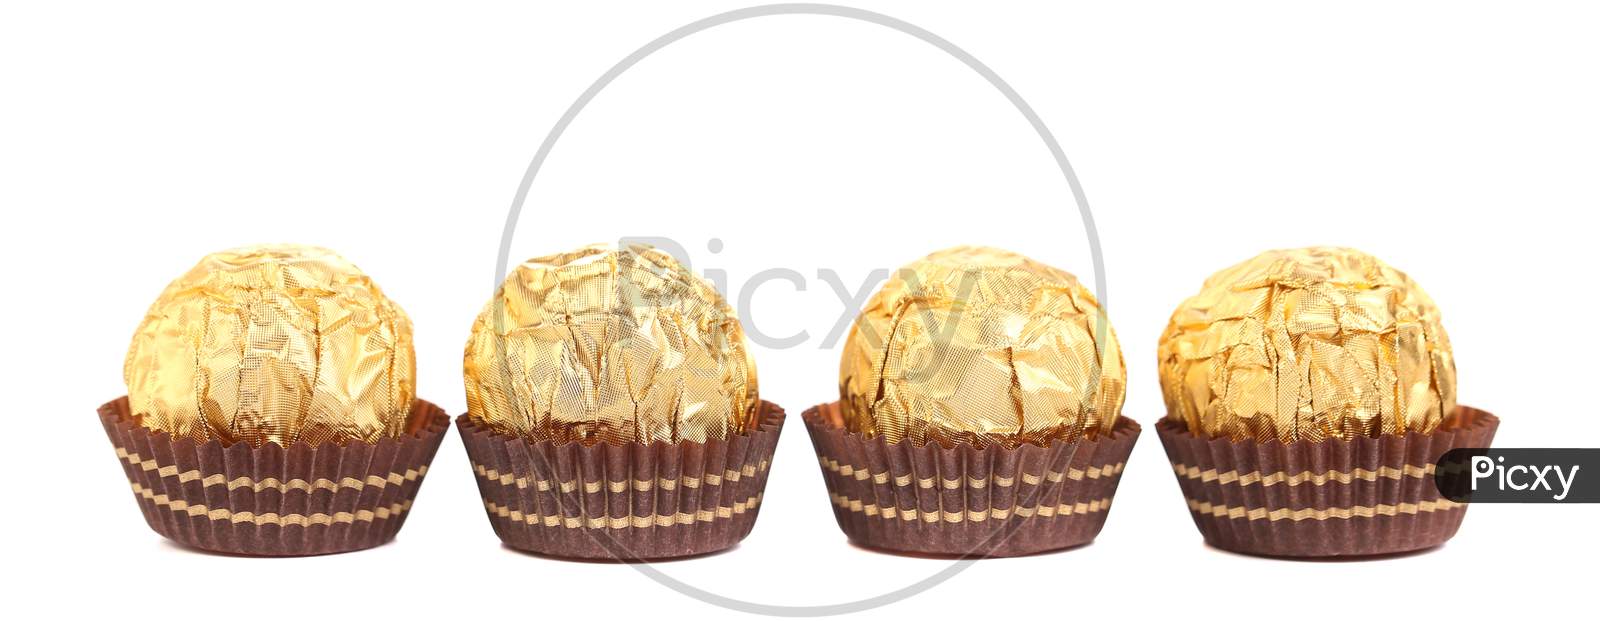 Four In Row Chocolate Bonbons. Isolated On A White Background.